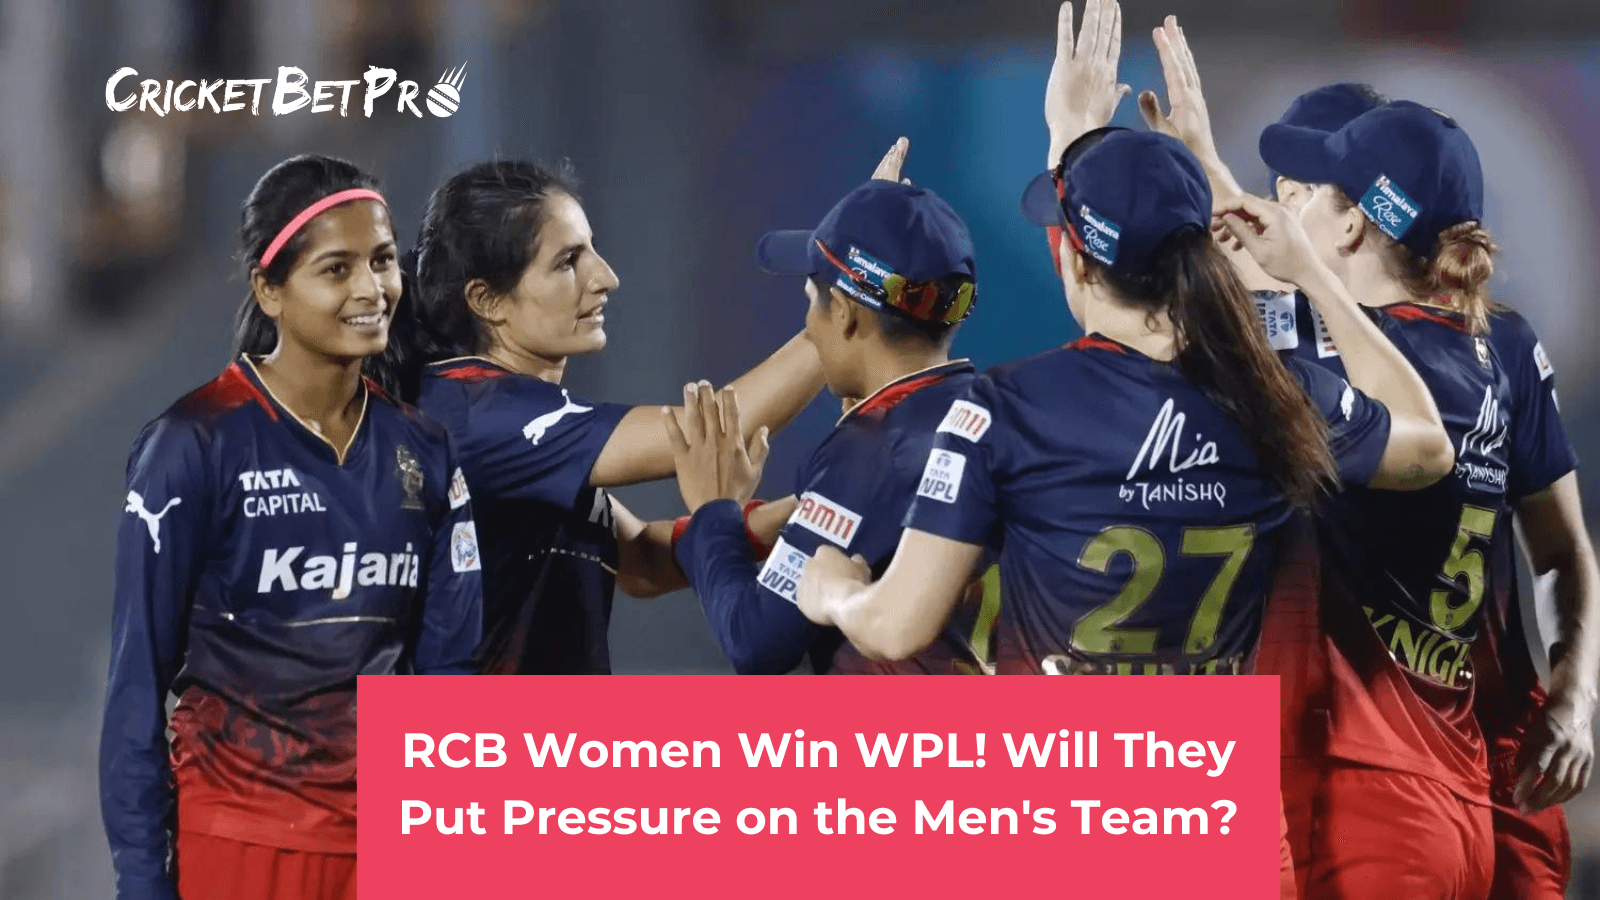 RCB Women Win WPL! Will They Put Pressure on the Men's Team